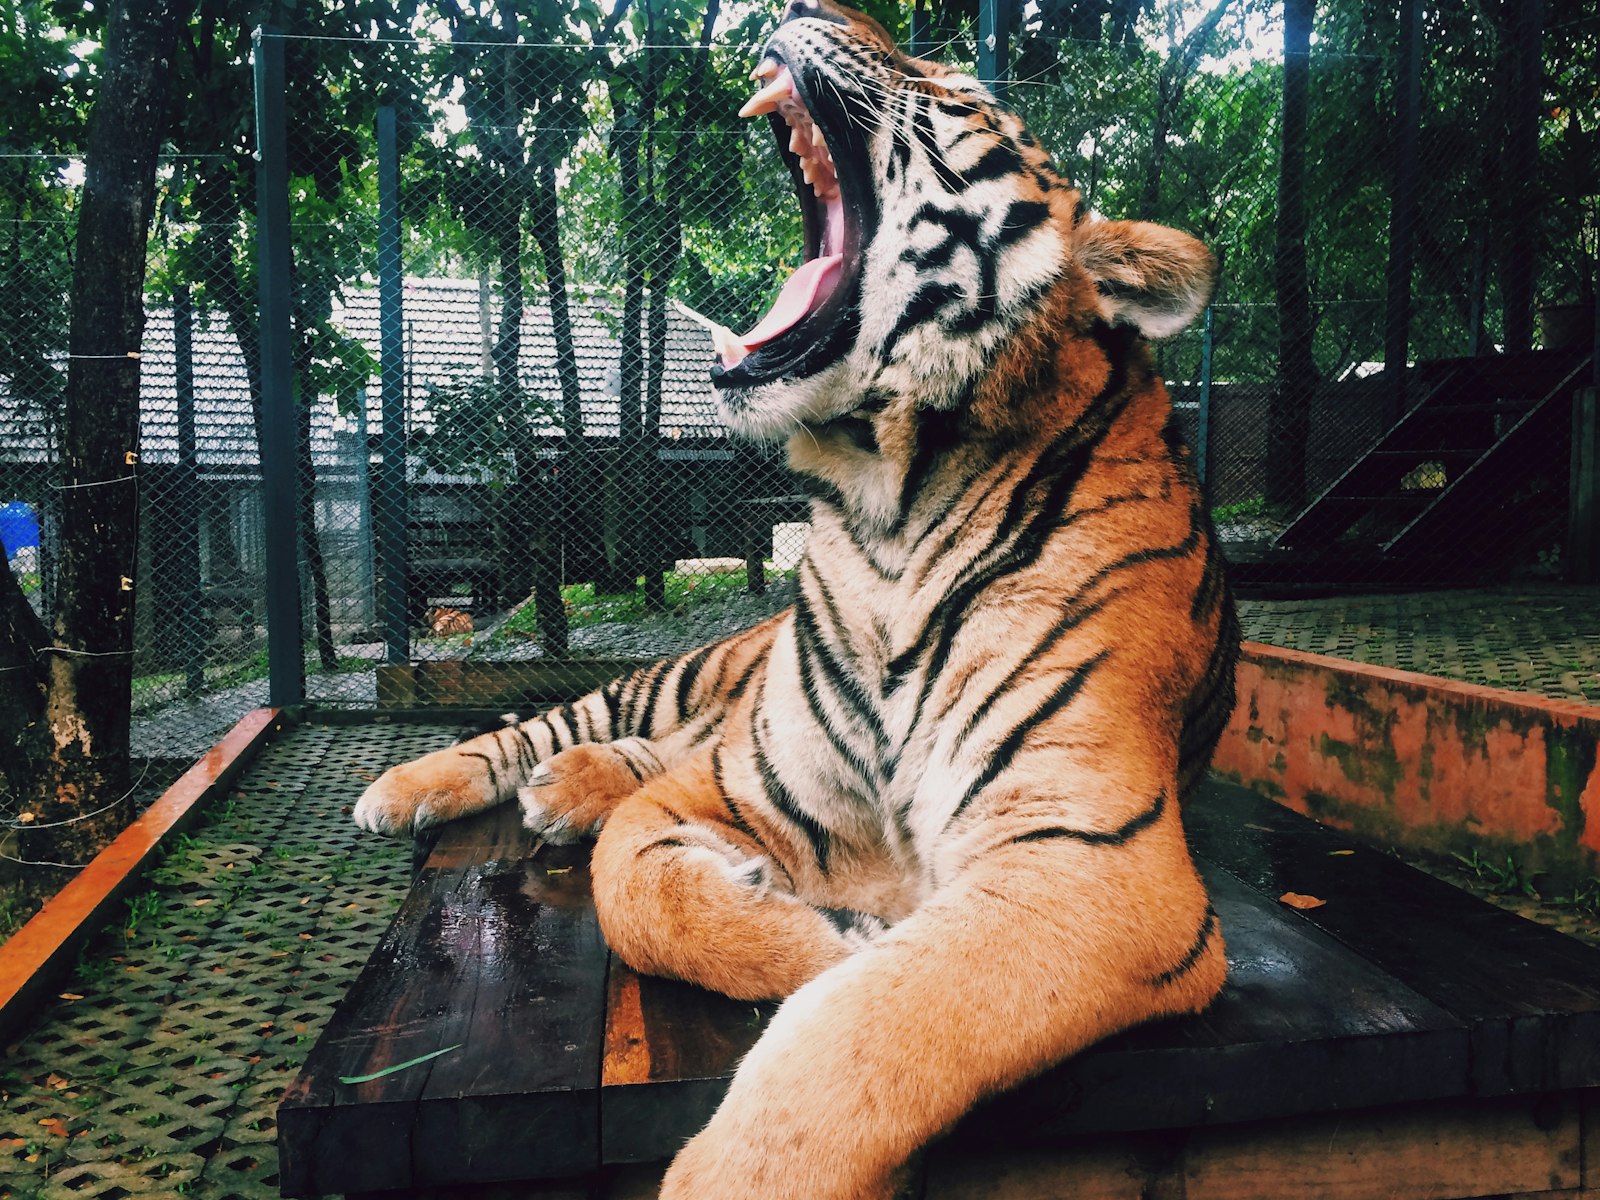 Apple iPhone 5s sample photo. Roaring tiger inside zoo photography